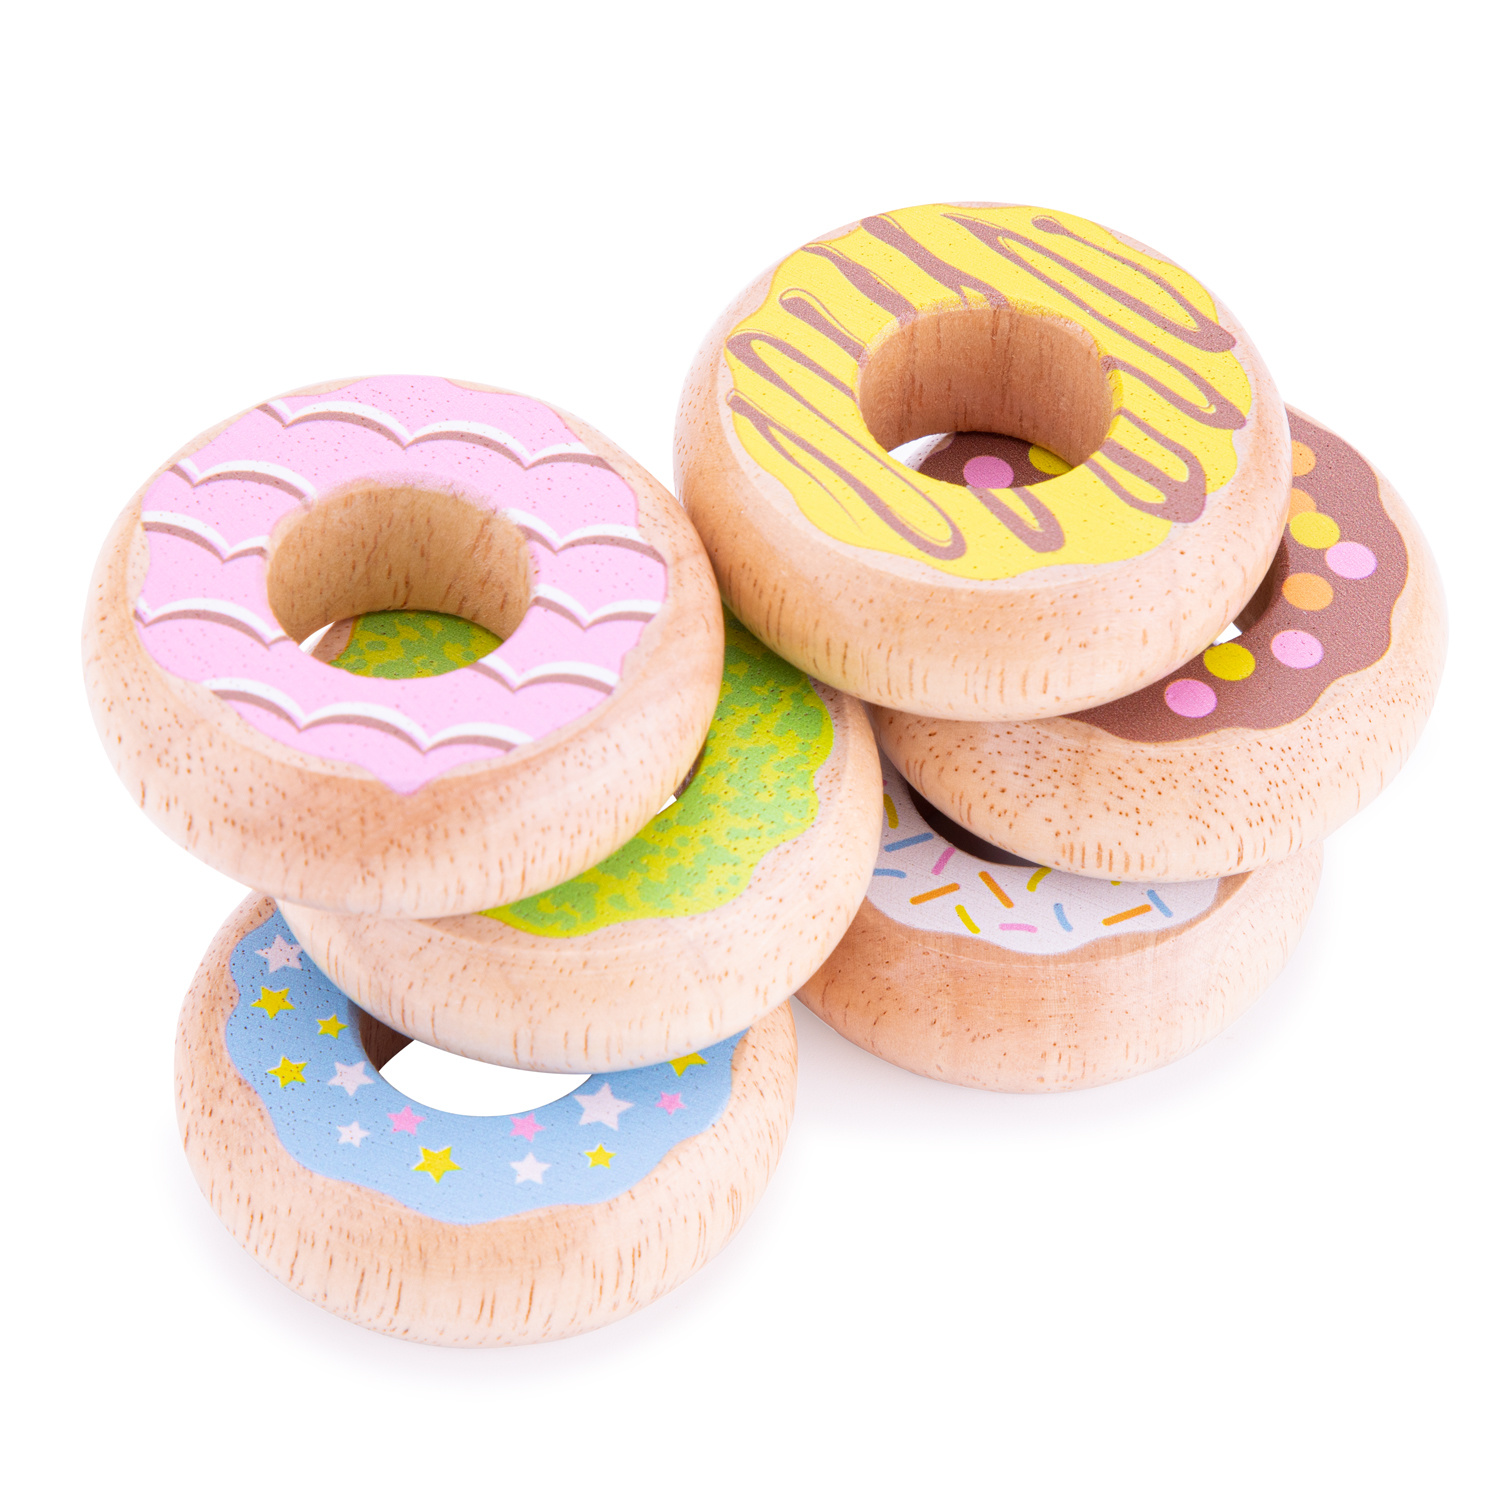 New Classic Toys Donuts - 6st.